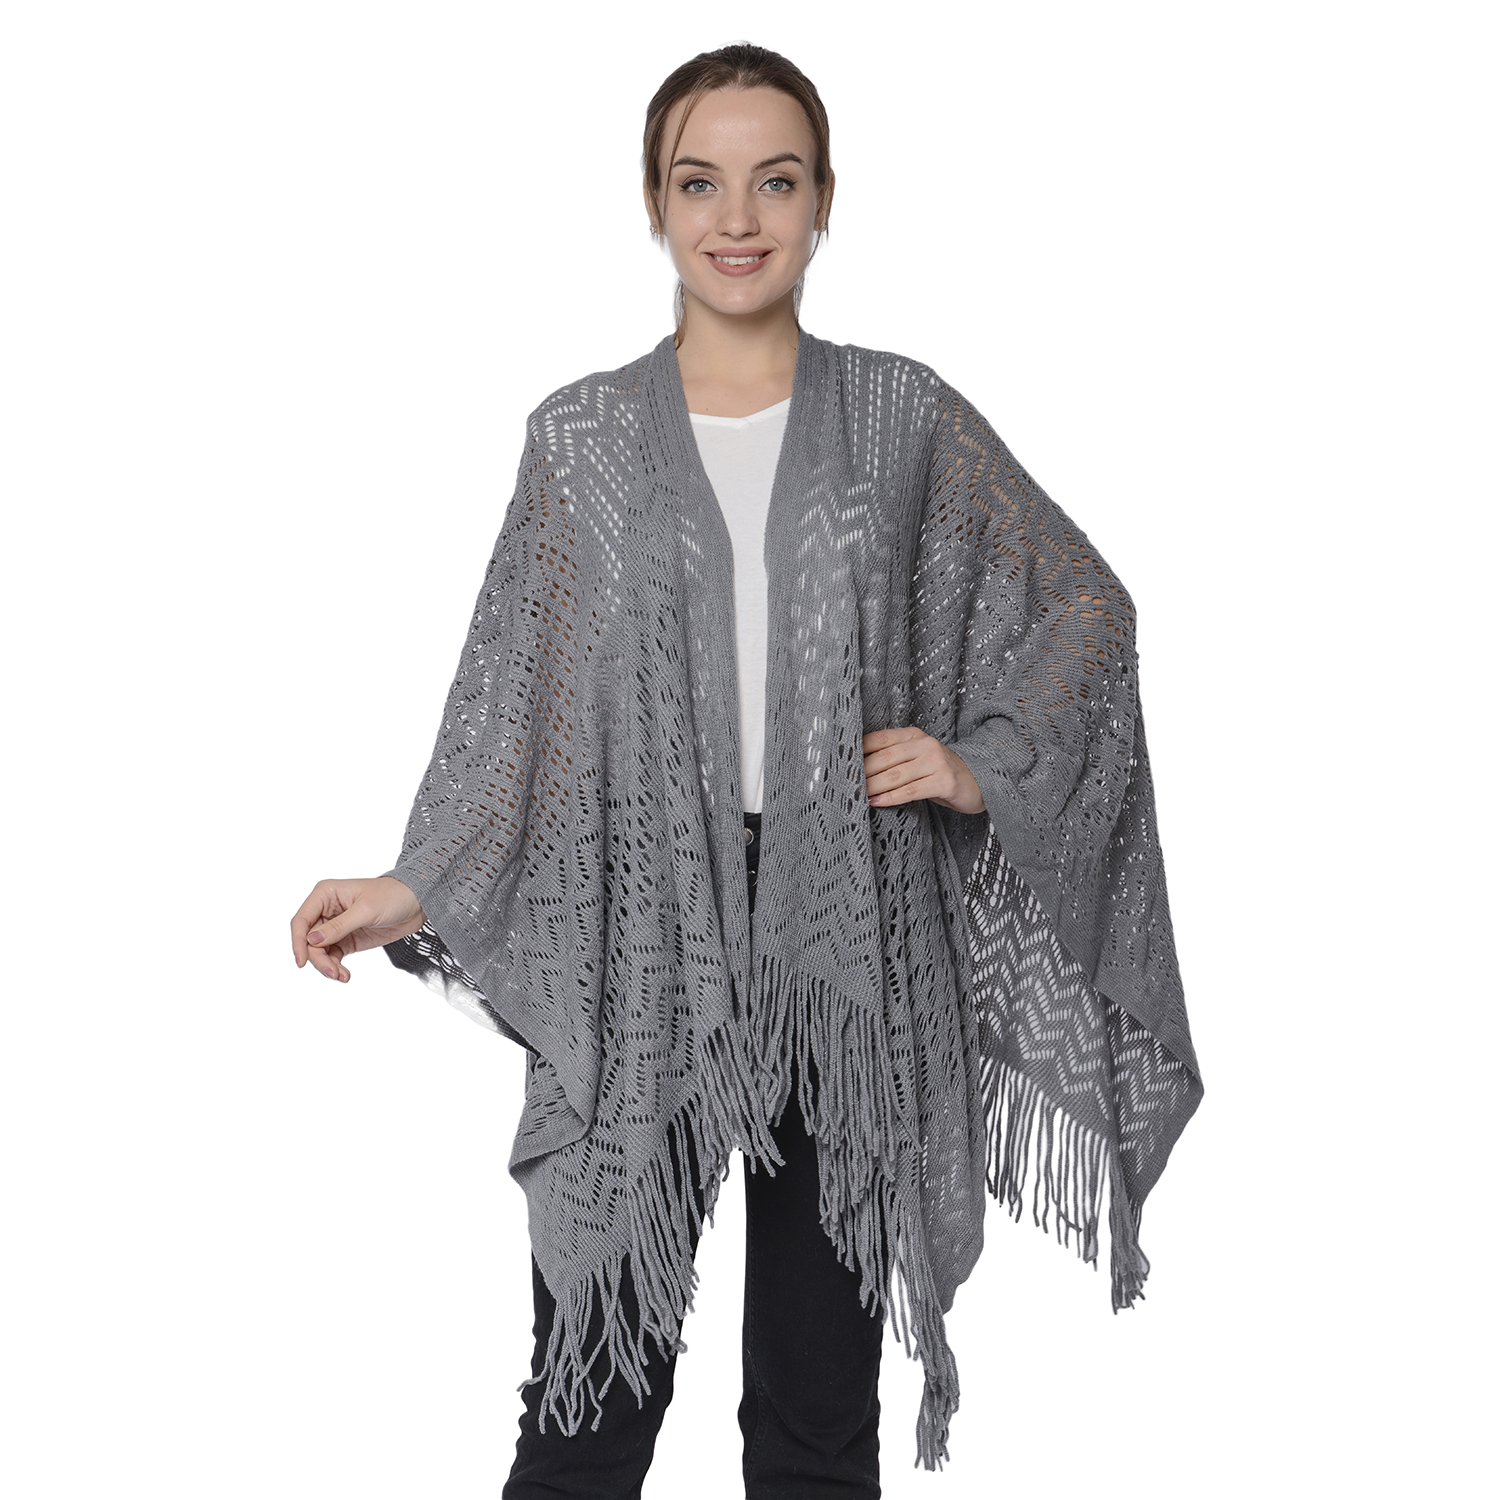 Hollow Out Knit Kimono with Tassels (60x125+10cm) - Grey